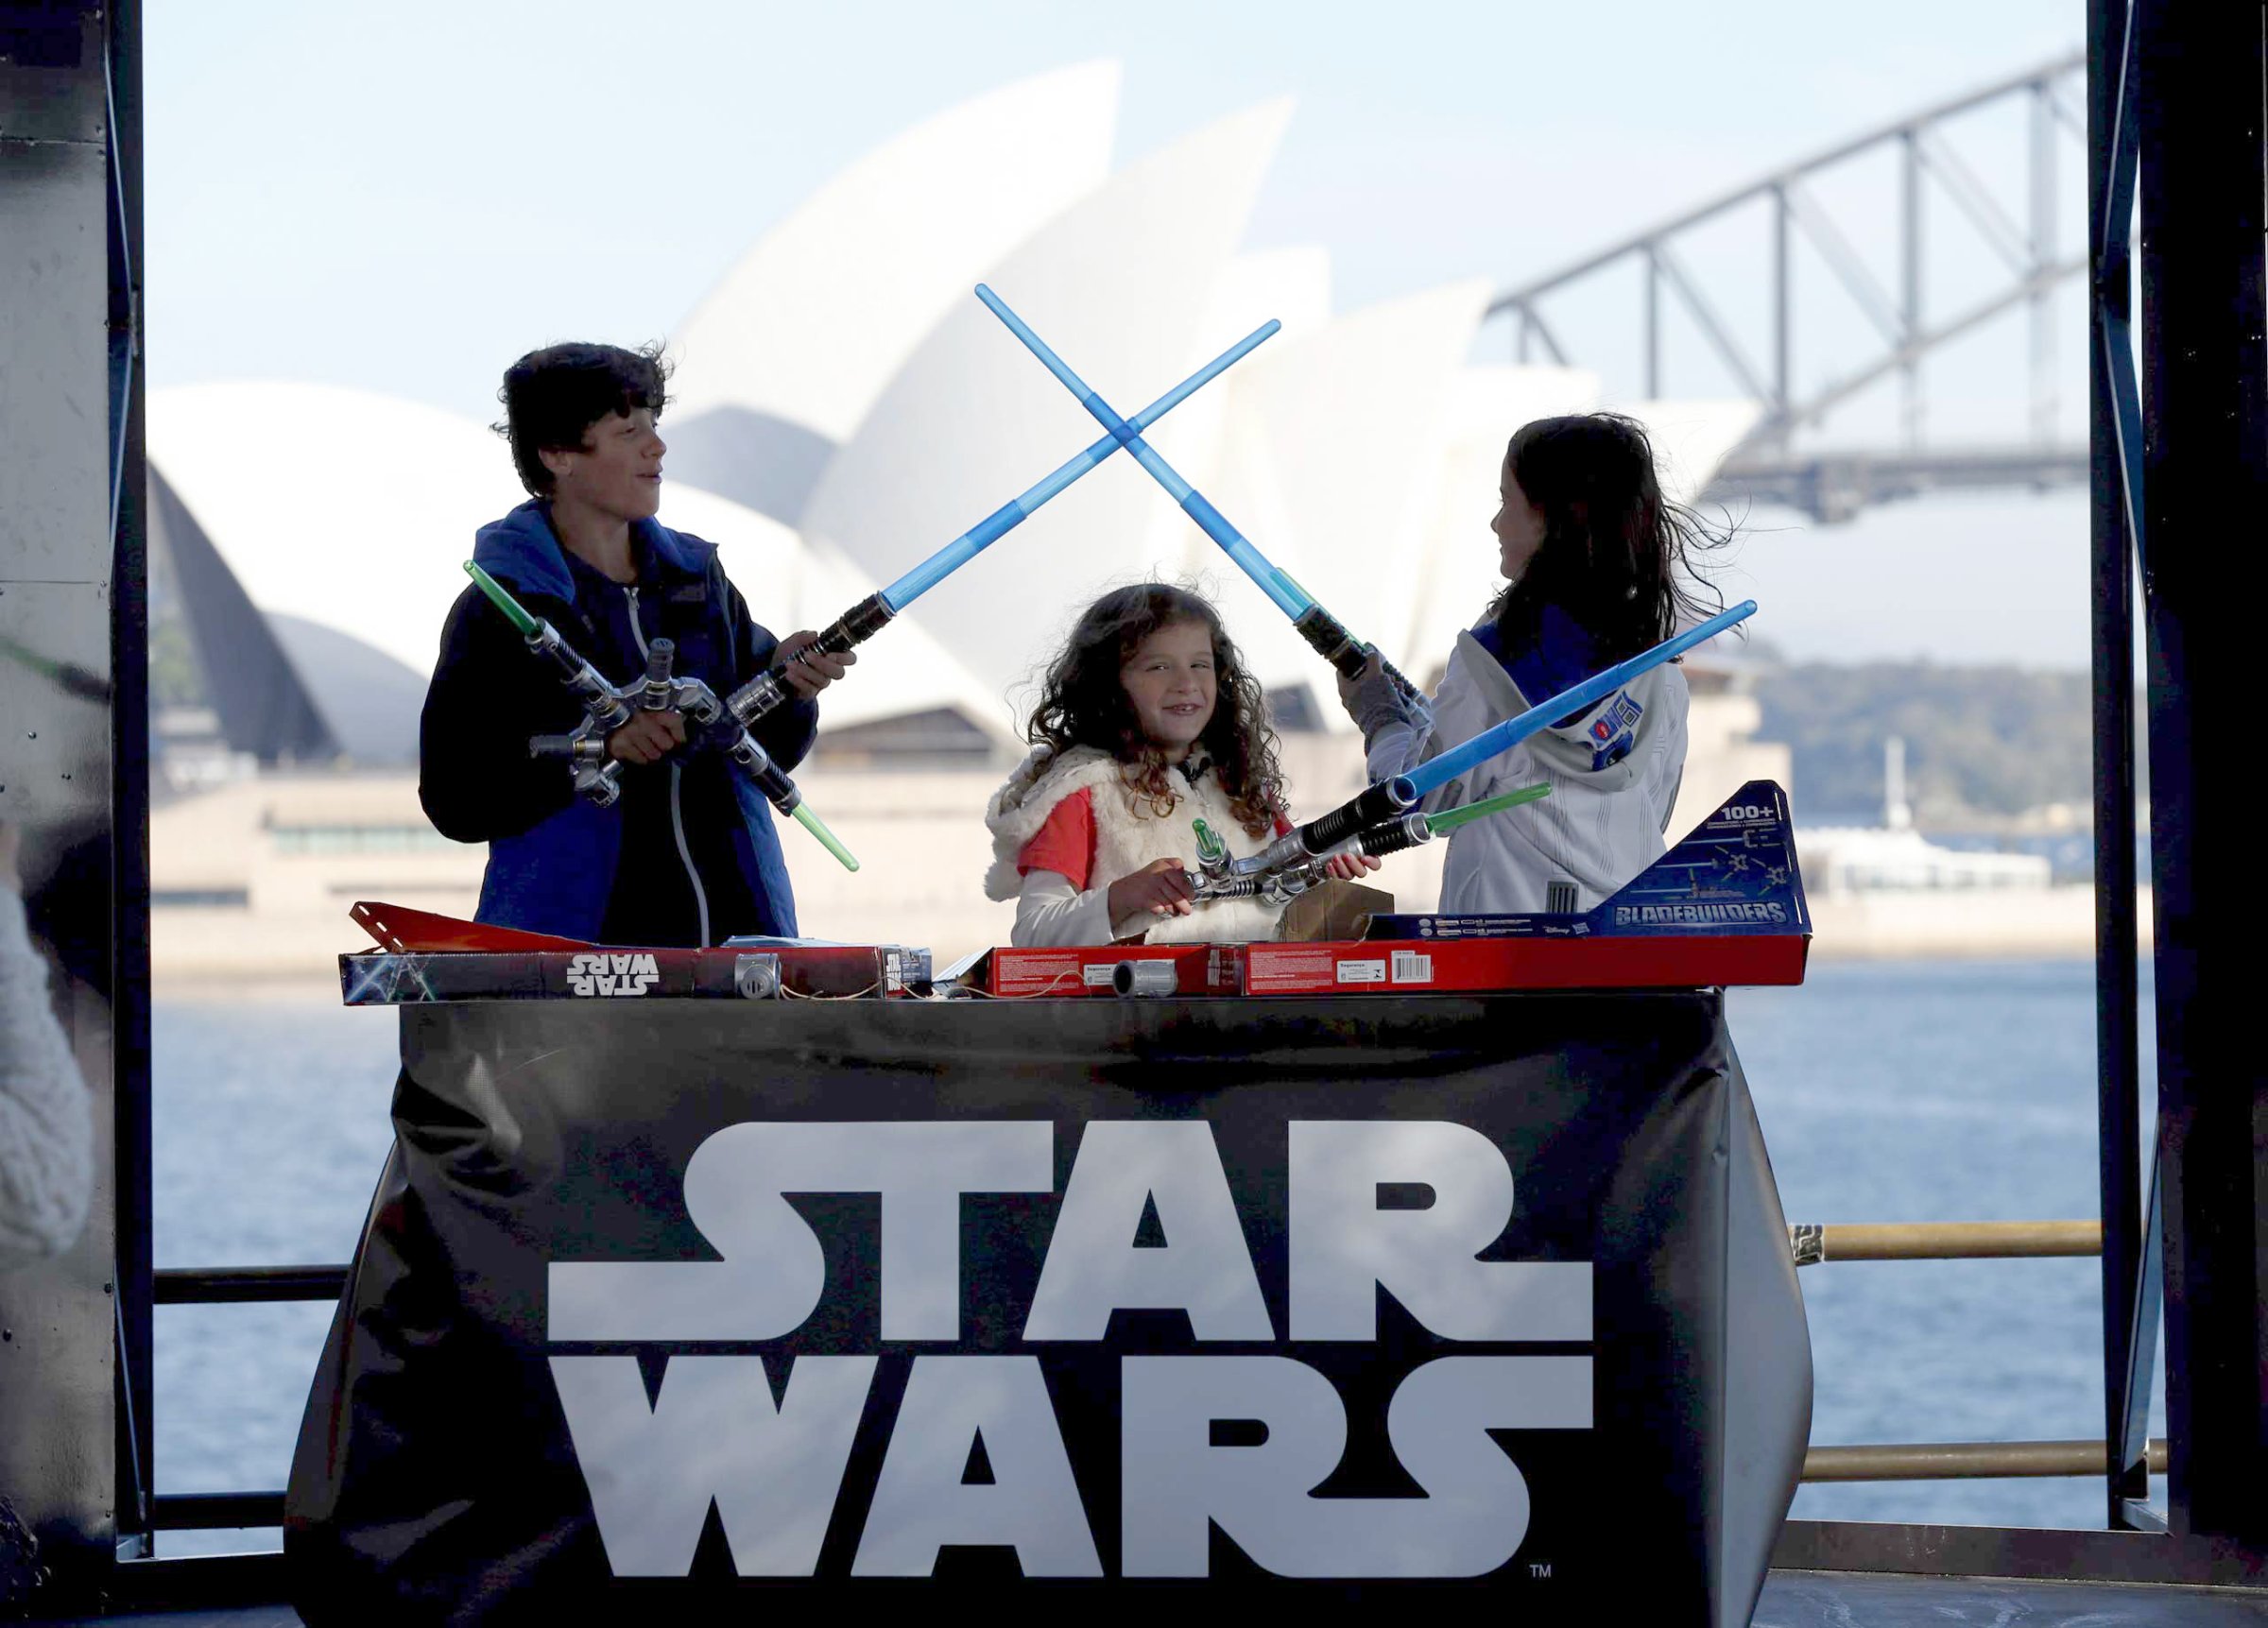 Caleb, Annie and Kayley Bratayley participate in a live internet unboxing event to reveal the new "Star Wars - The Force Awakens" toys in Sydney